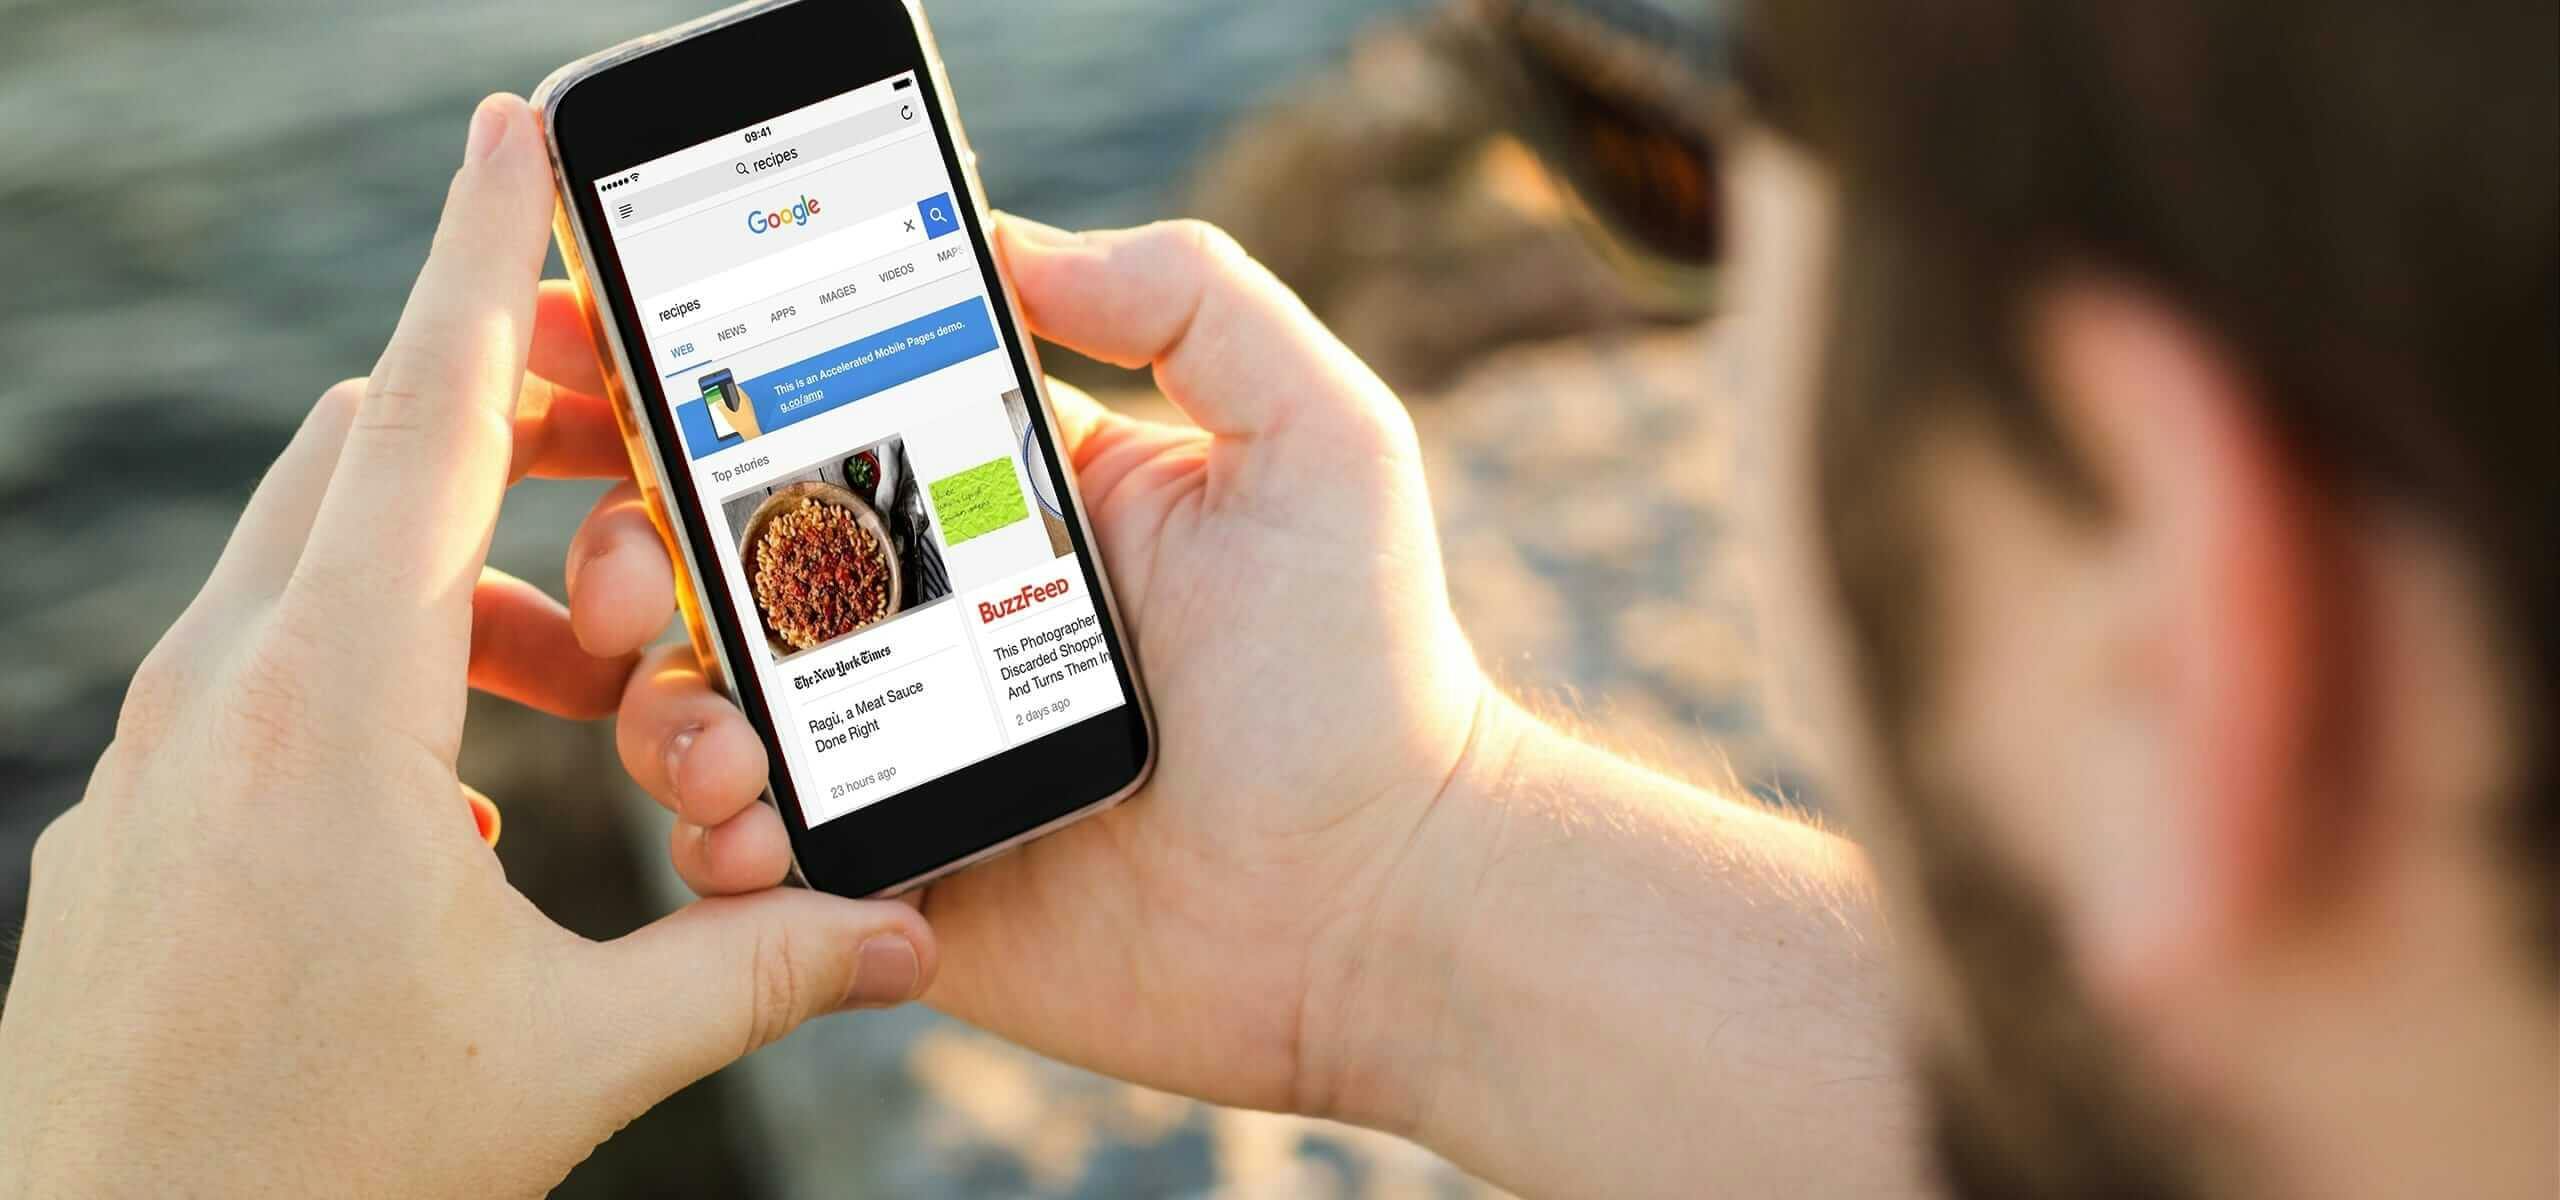 All You Need to Know about Accelerated Mobile Pages (AMP’s)